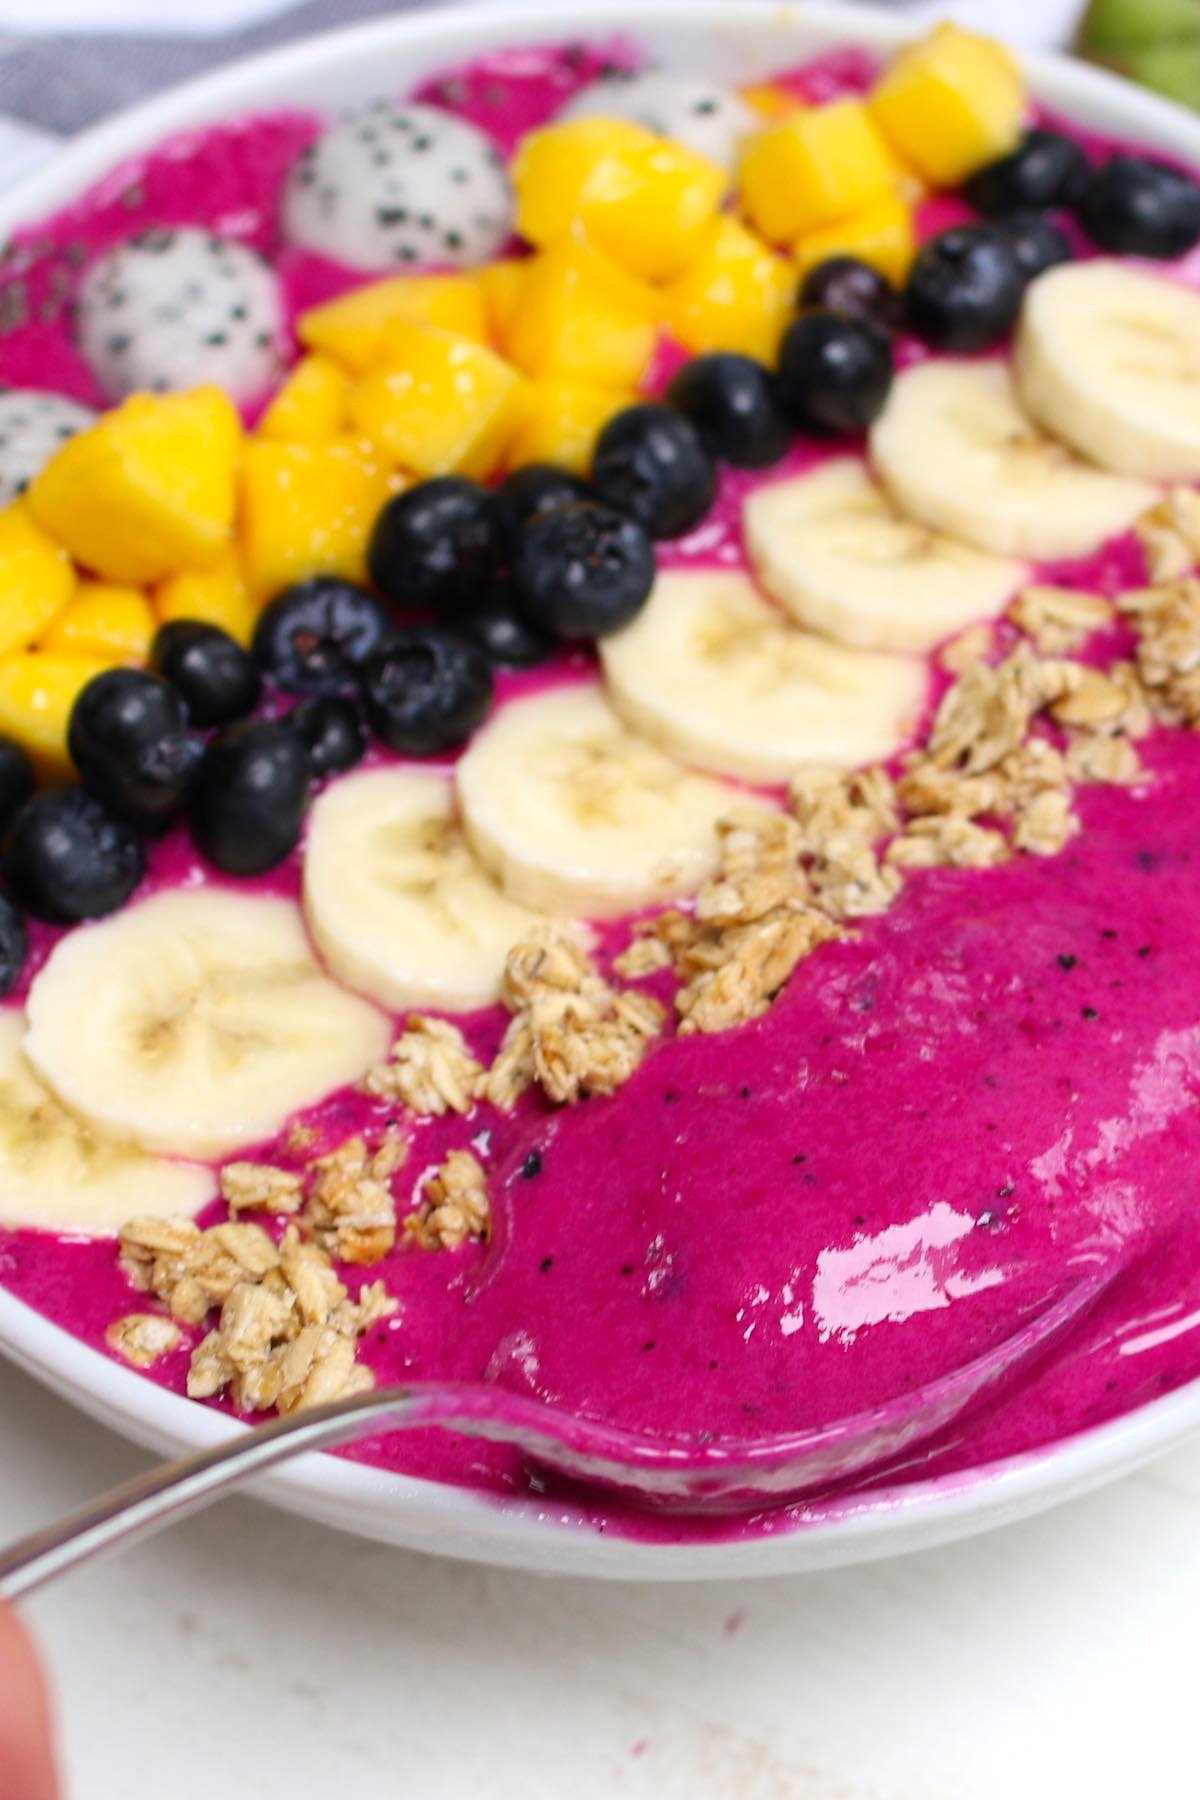 Spooning the smoothie in a pitaya bowl to show the thick texture